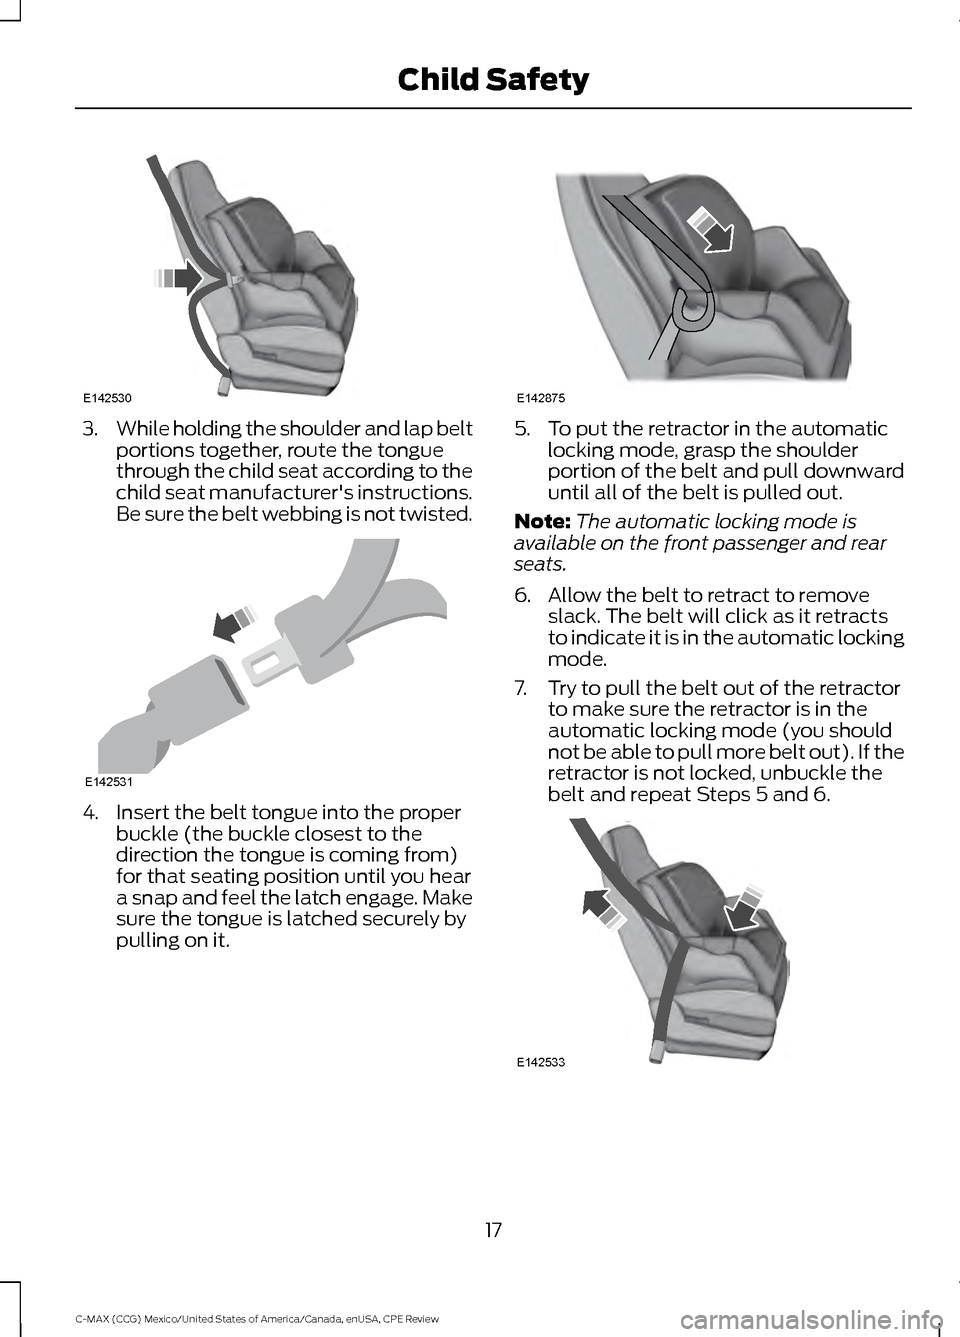 FORD C MAX HYBRID 2015 2.G Owners Manual 3.
While holding the shoulder and lap belt
portions together, route the tongue
through the child seat according to the
child seat manufacturers instructions.
Be sure the belt webbing is not twisted. 